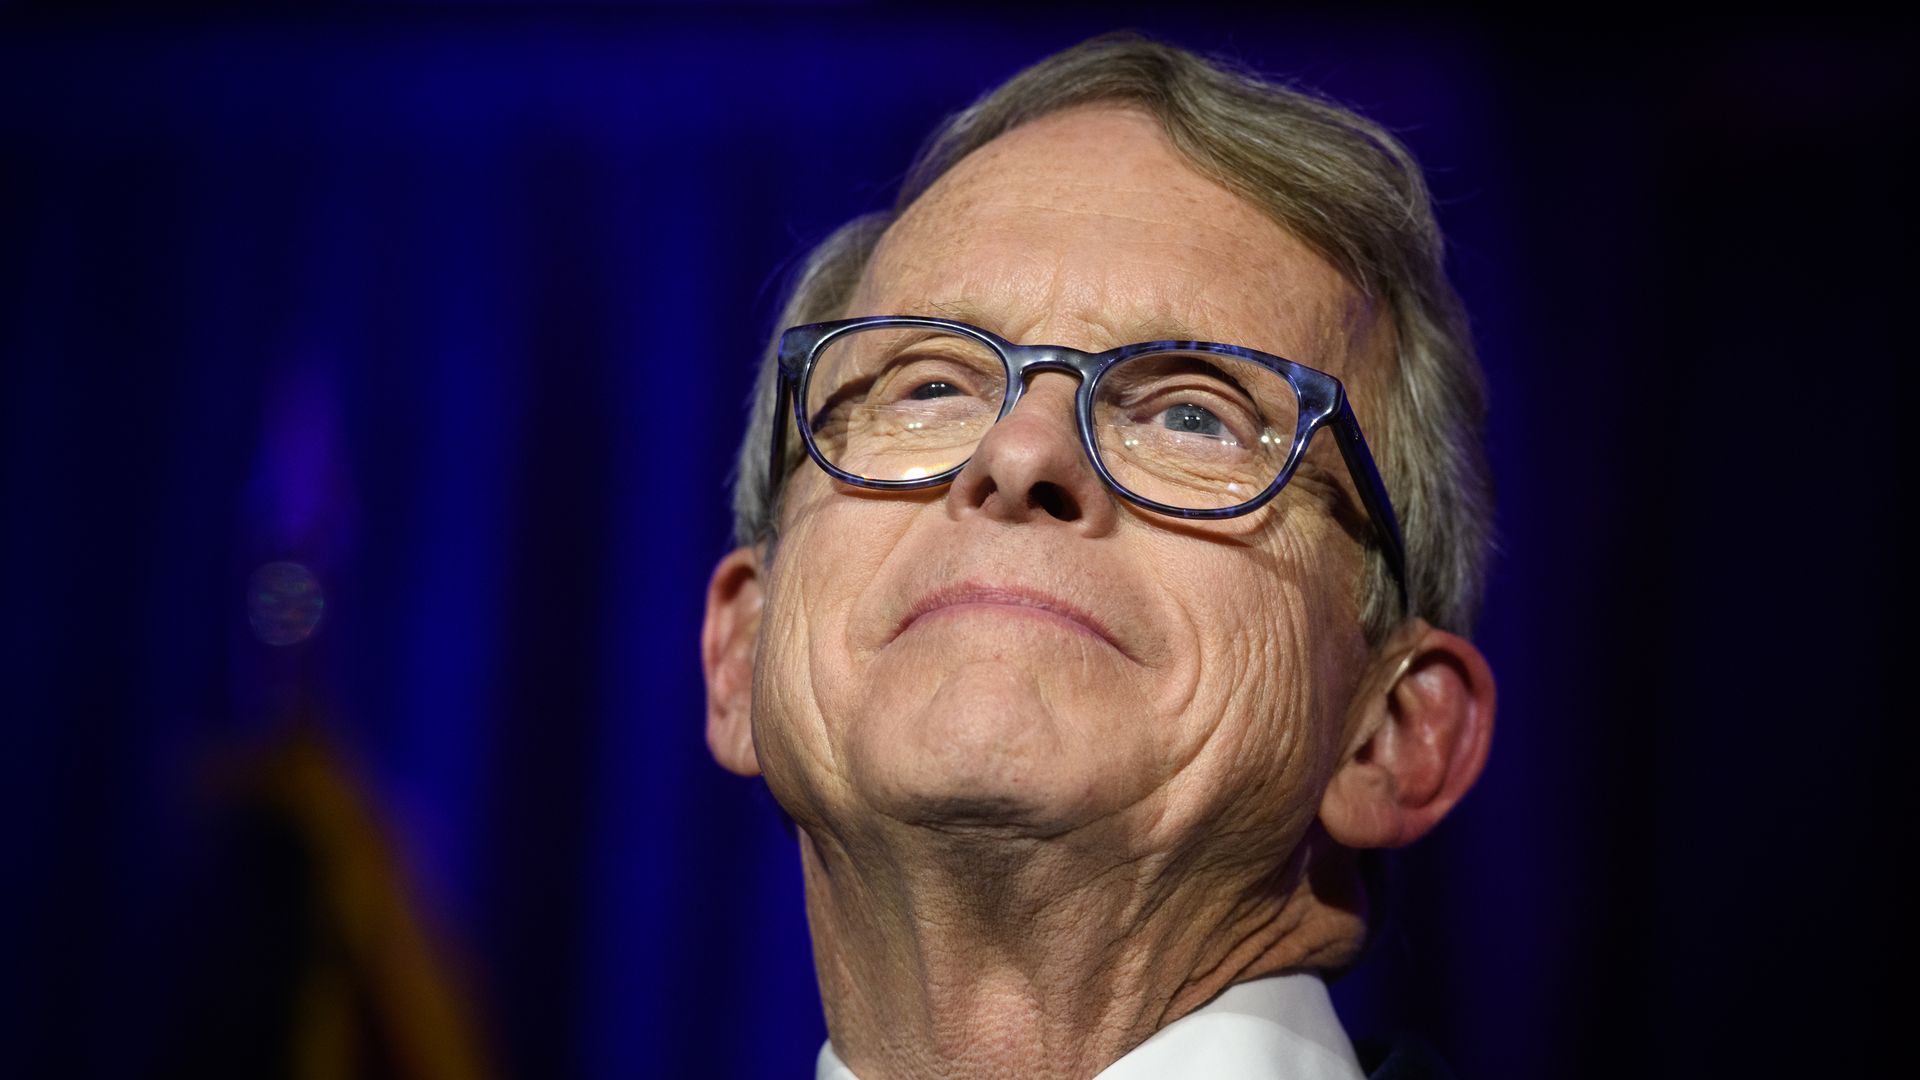 Ohio Gov. Mike DeWine is seen smiling on election night.